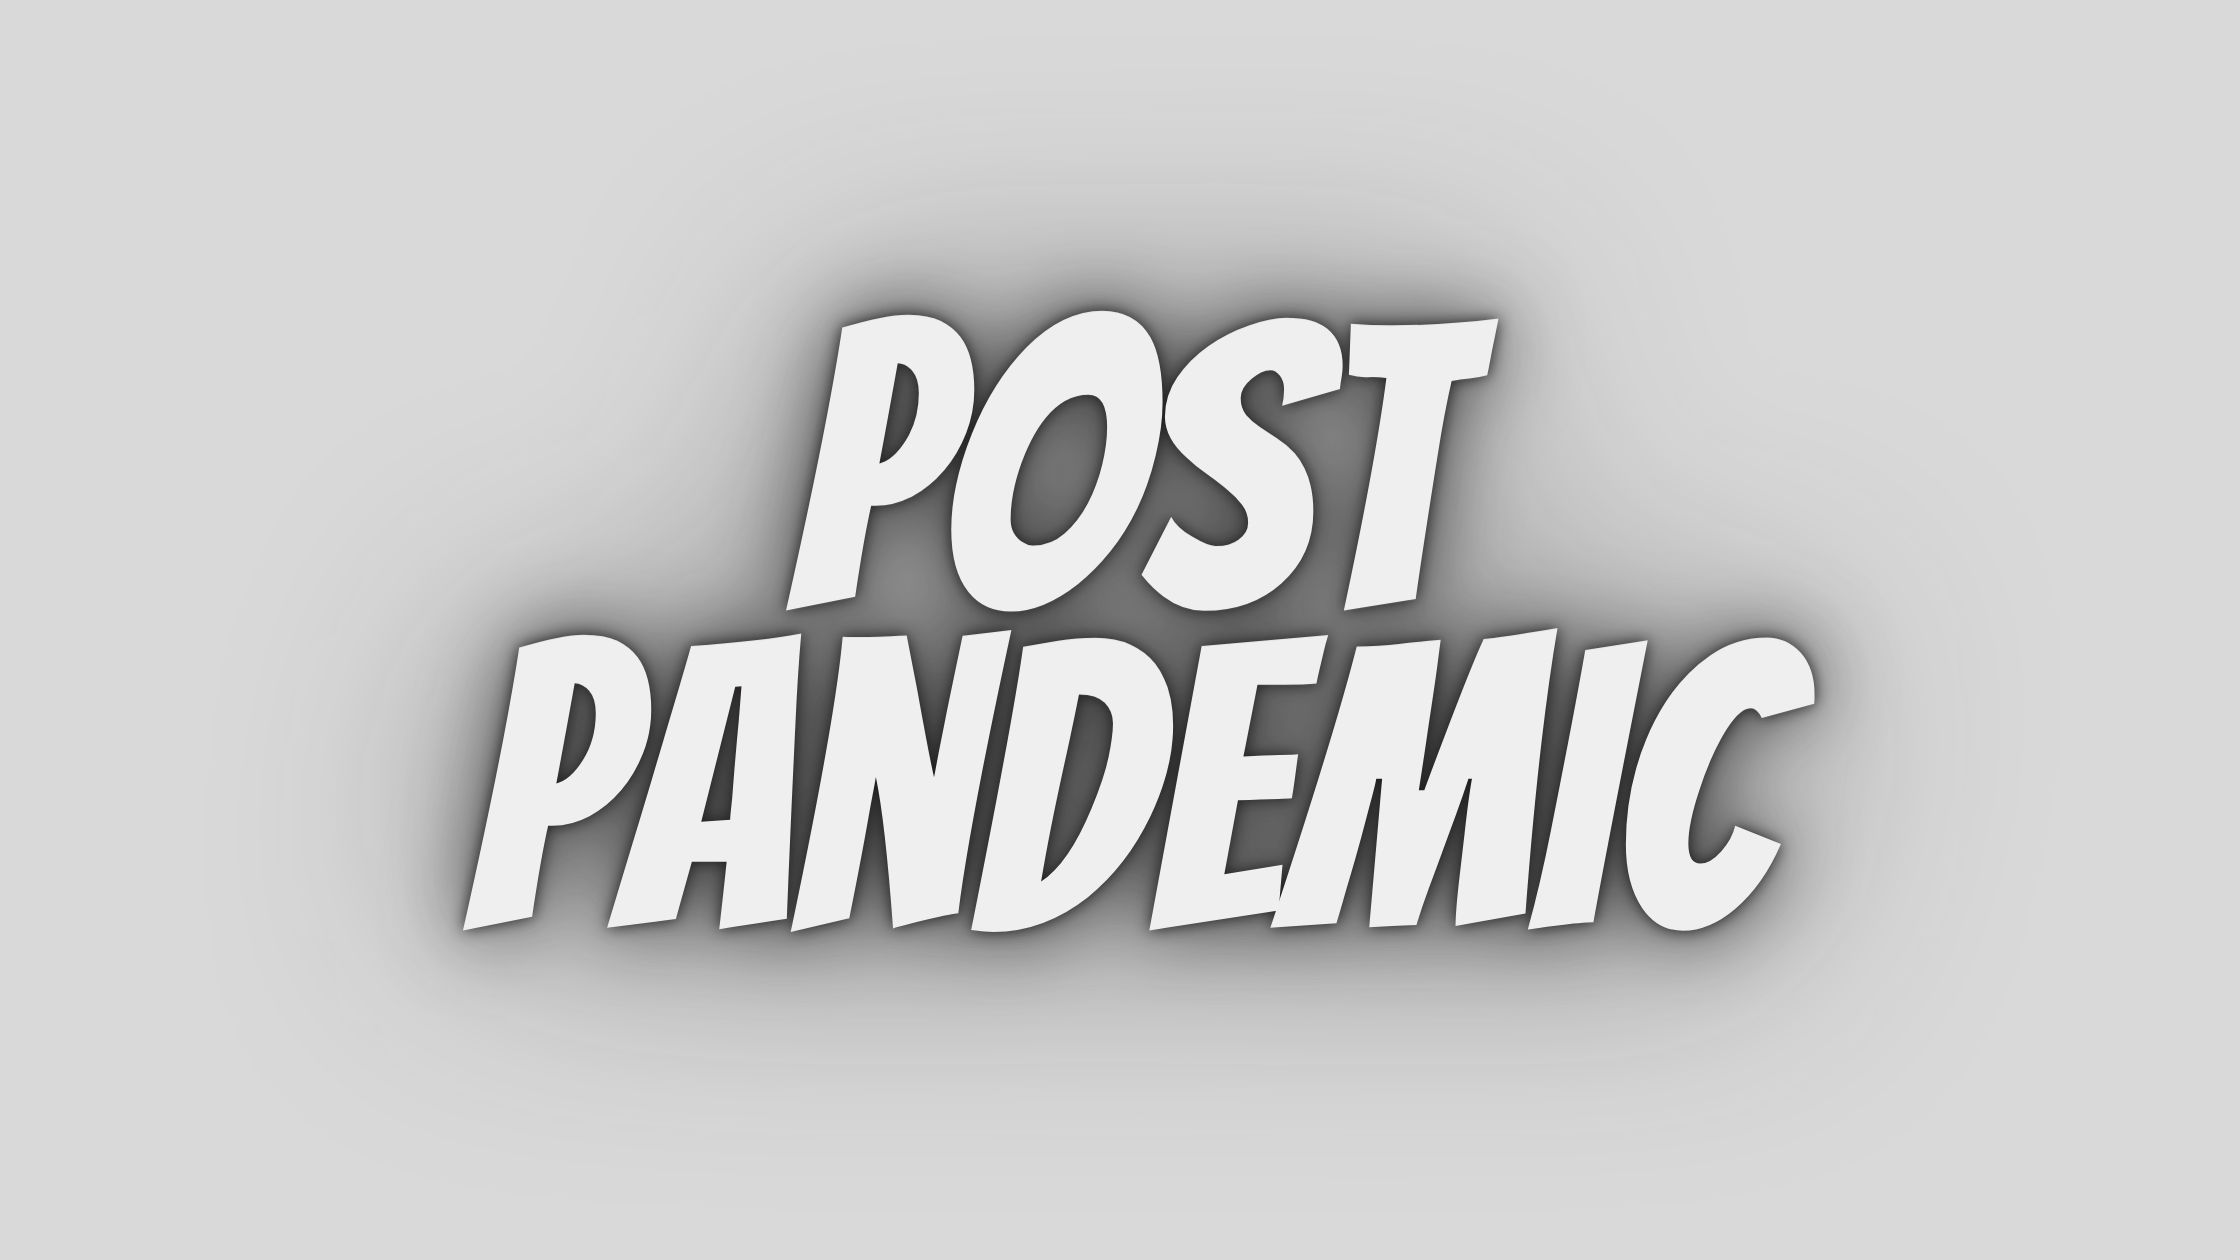 Is Your 3PL Company Post-Pandemic Ready?